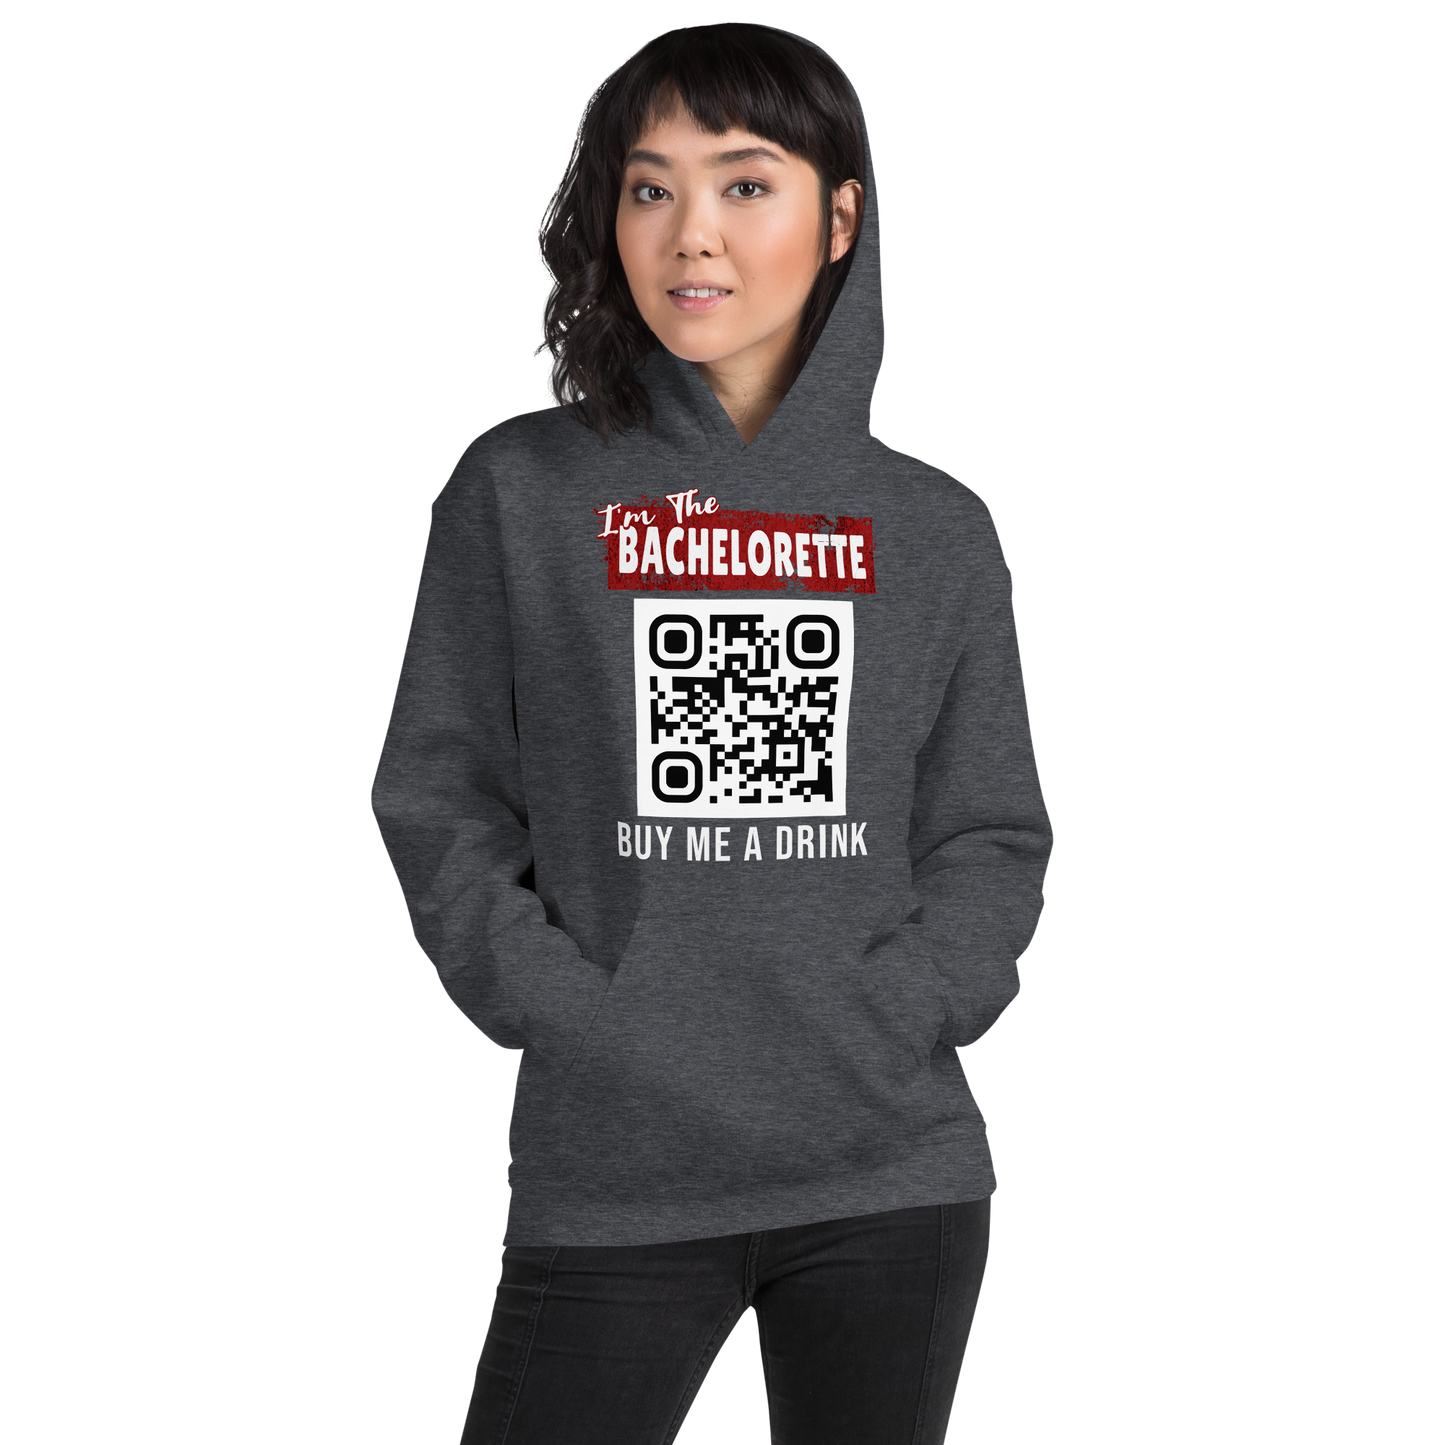 I'm The Bachelorette Buy Me A Drink Hoodie - Personalizable